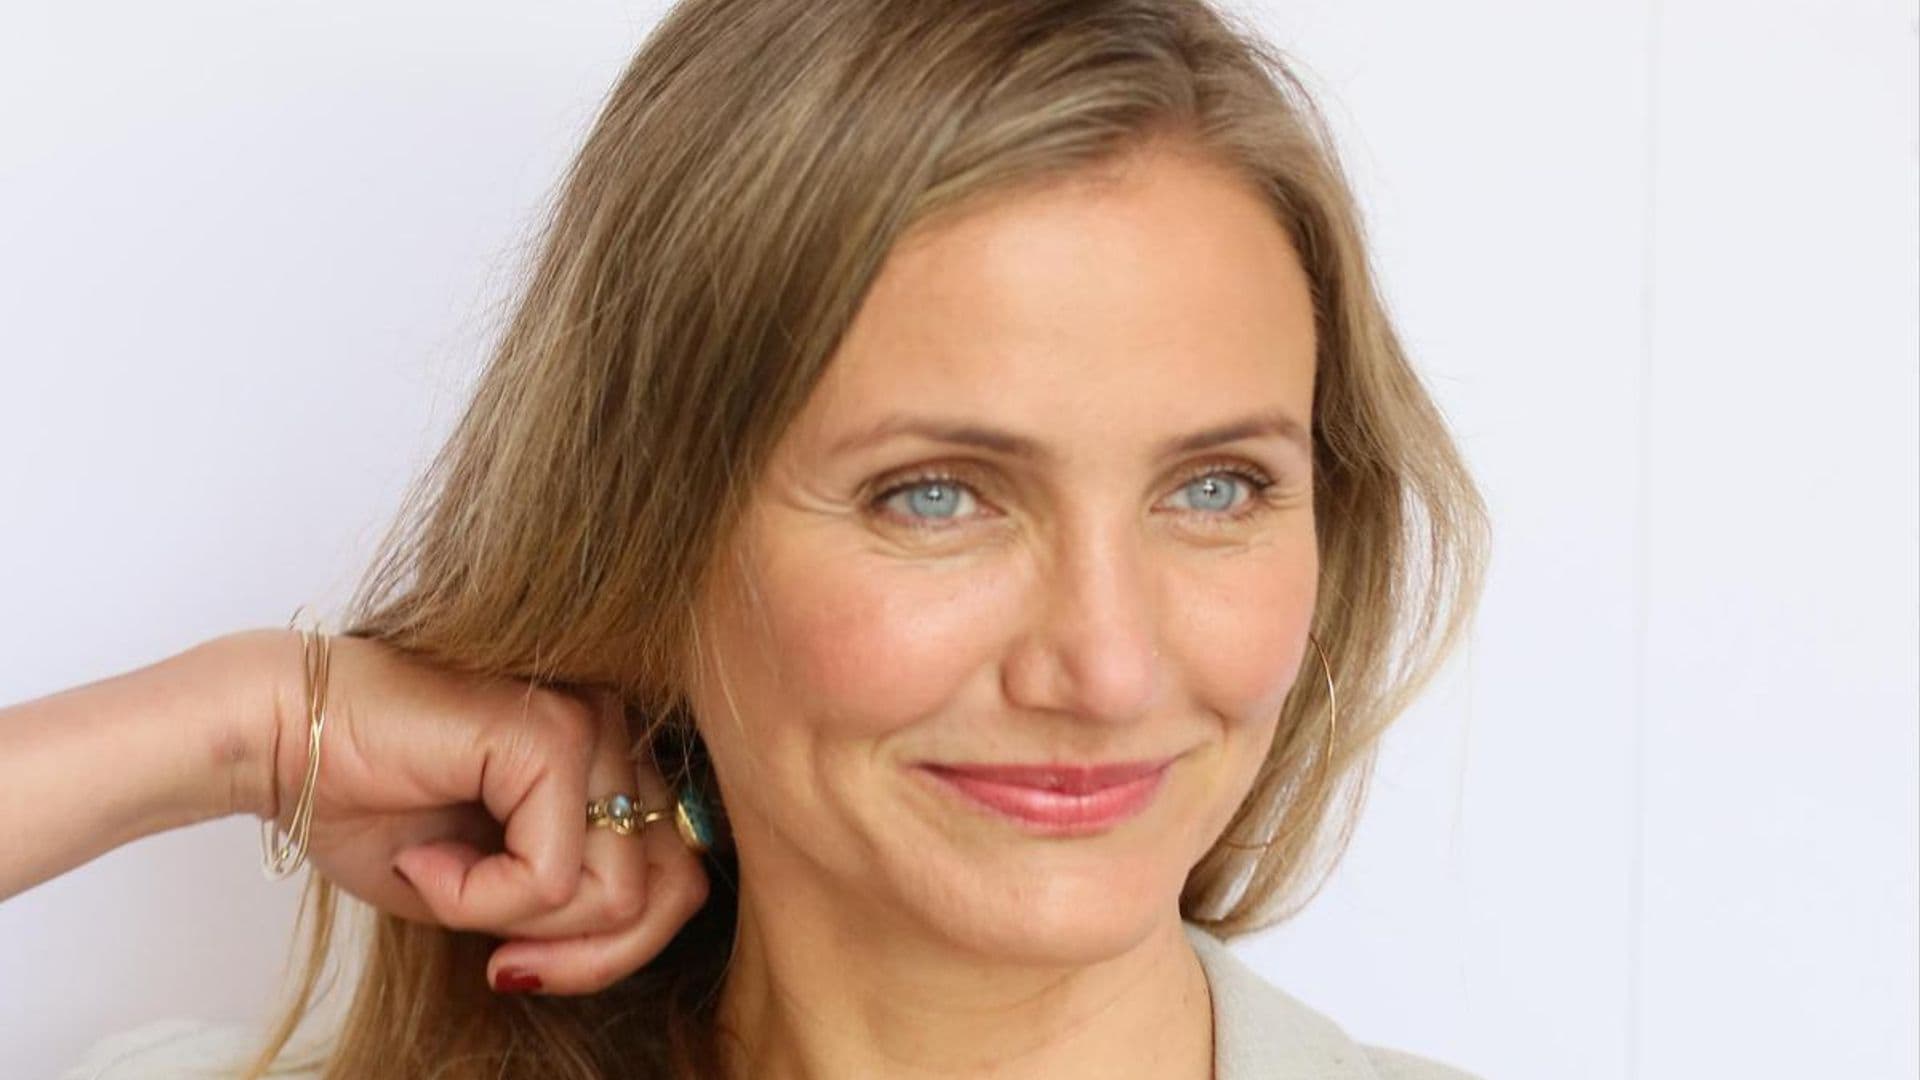 Cameron Diaz’s new year’s resolution for 2023 is about not complicating things